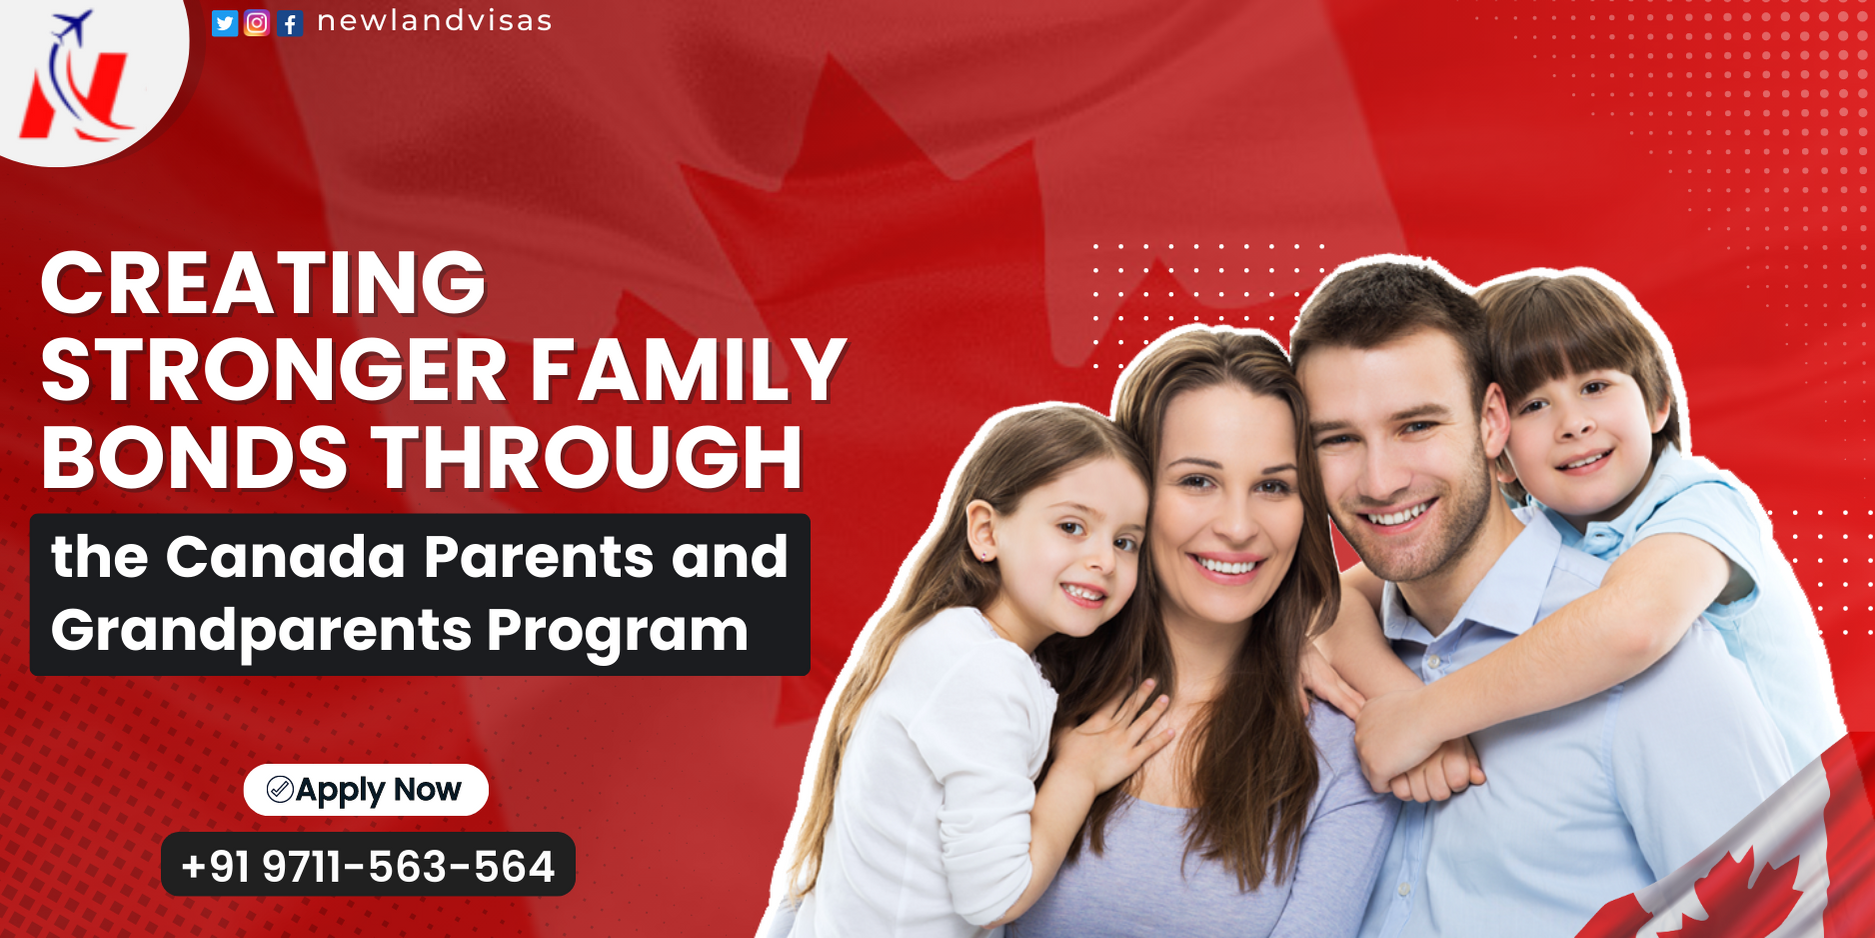 Creating Stronger Family Bonds Through the Canada Parents and Grandparents Program